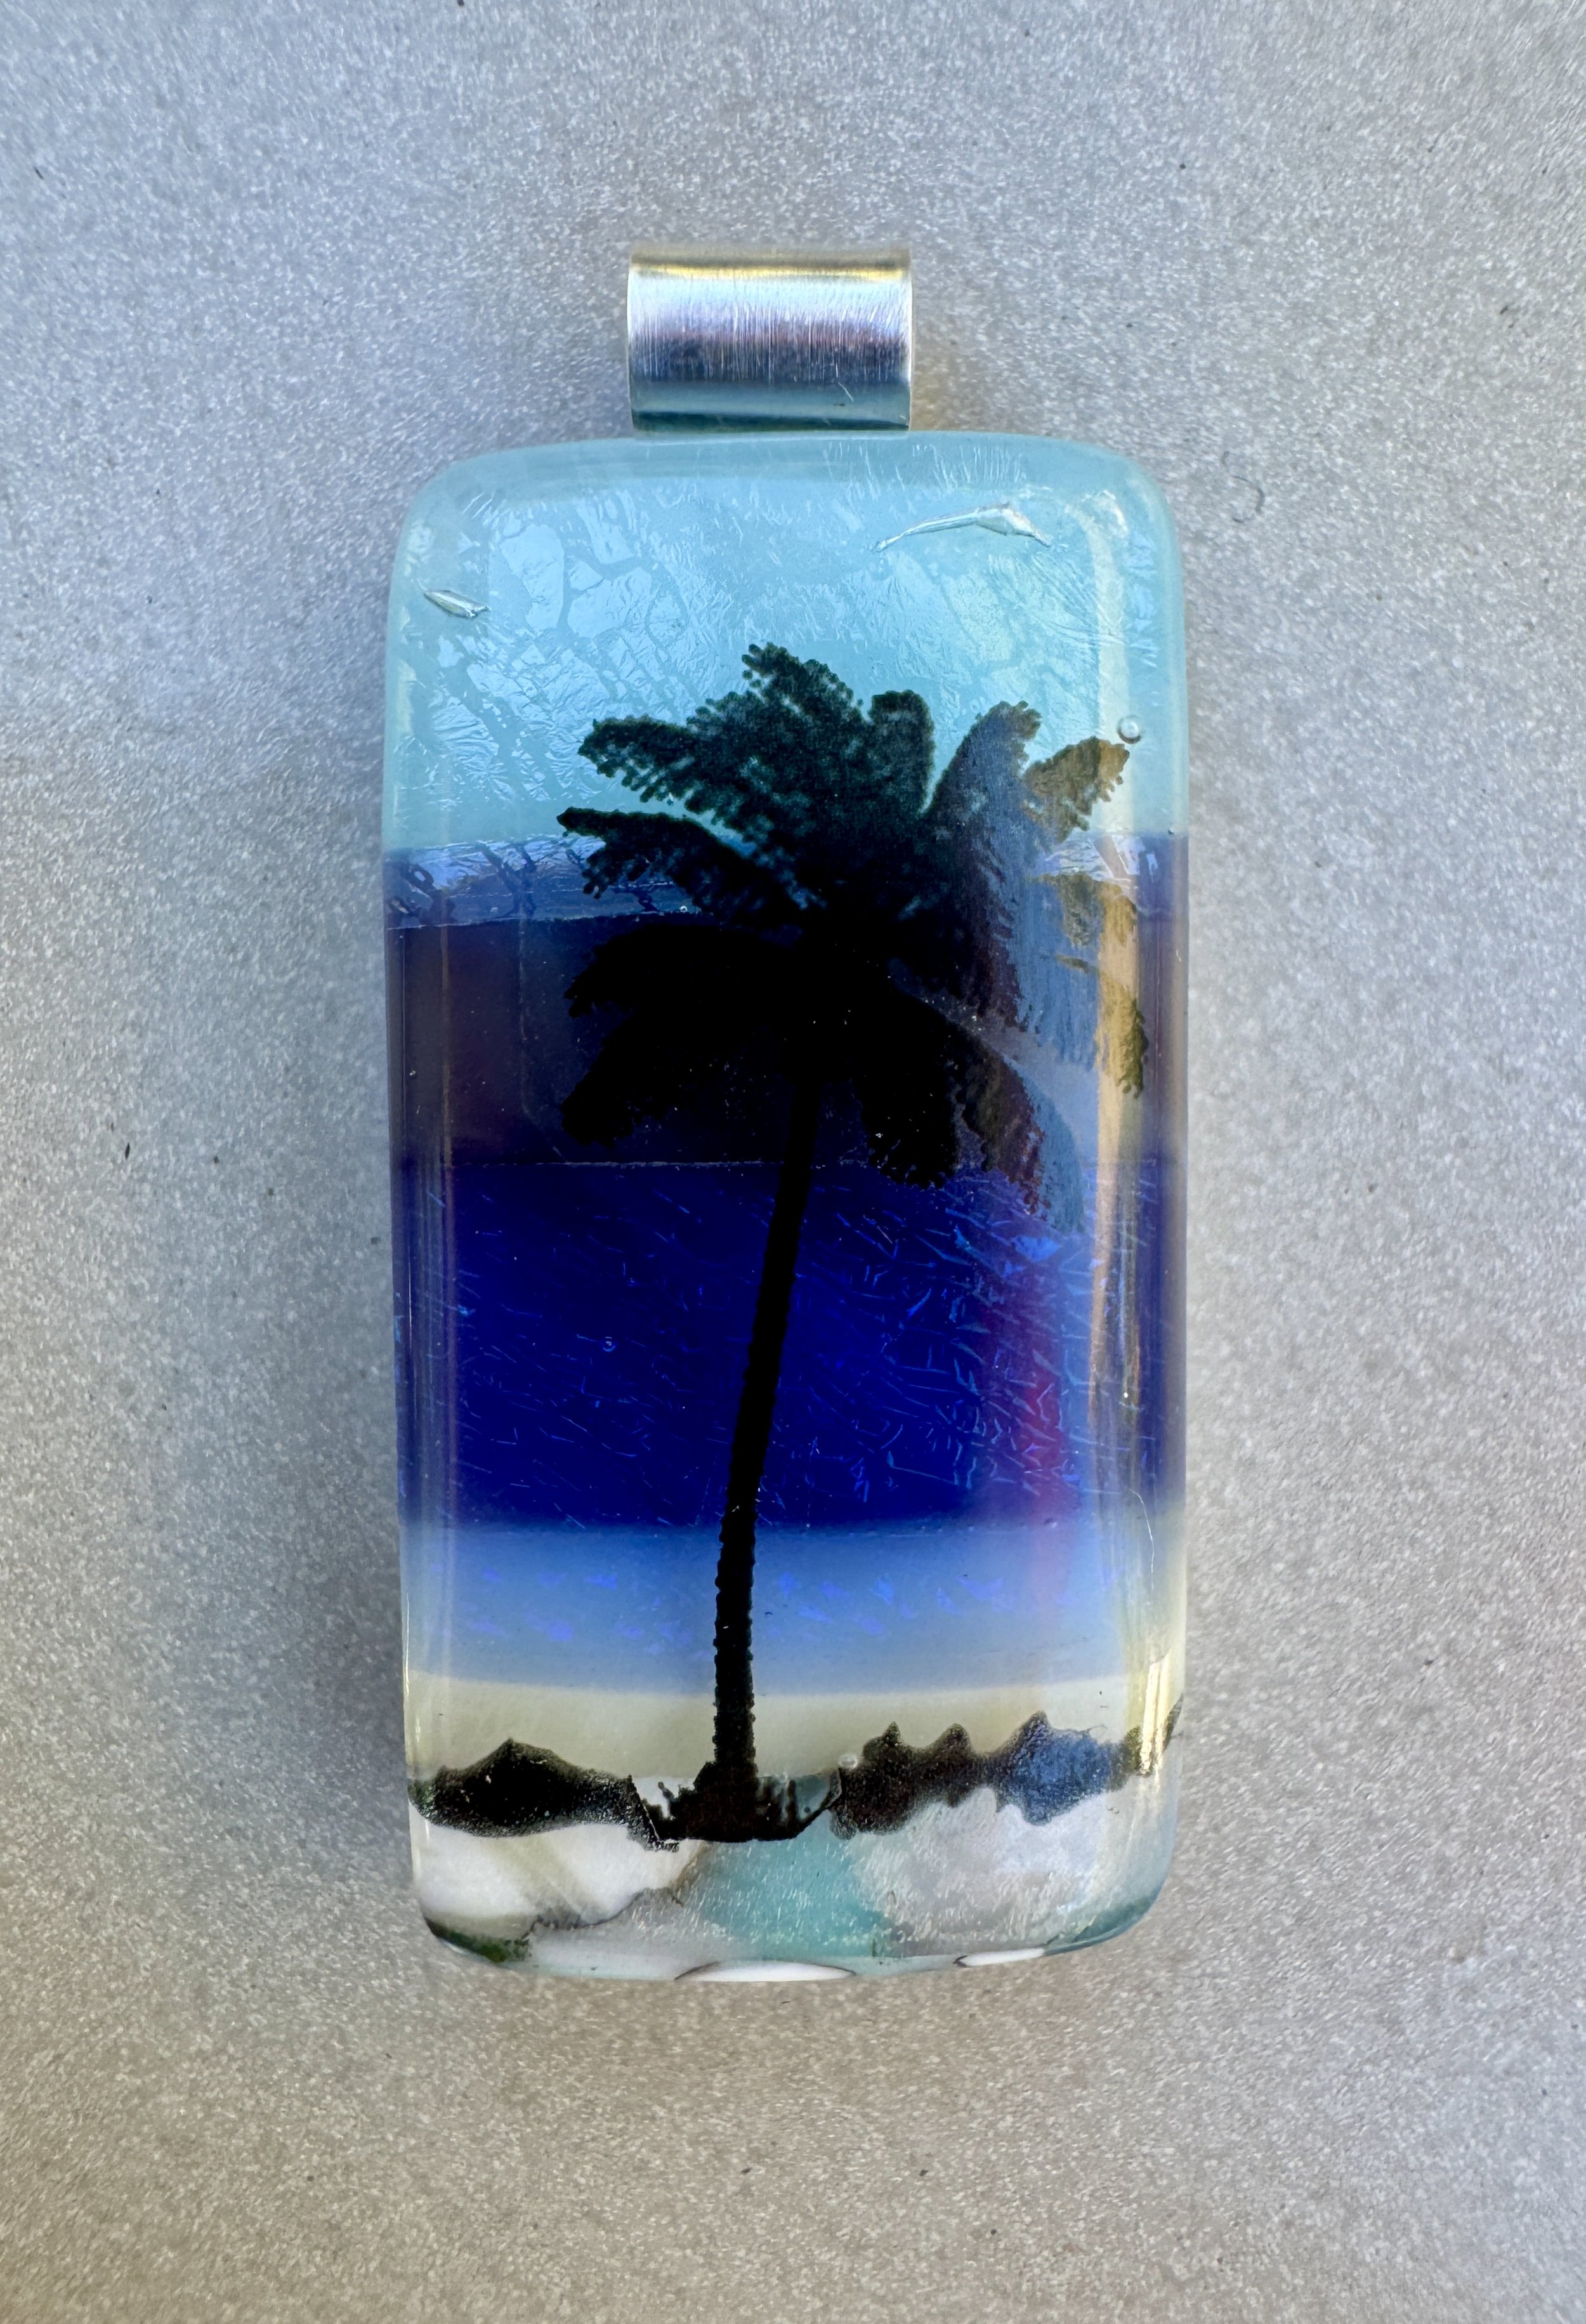 SP06 - 3/4"W  x 1.25"L - Available at Art Glass Guild